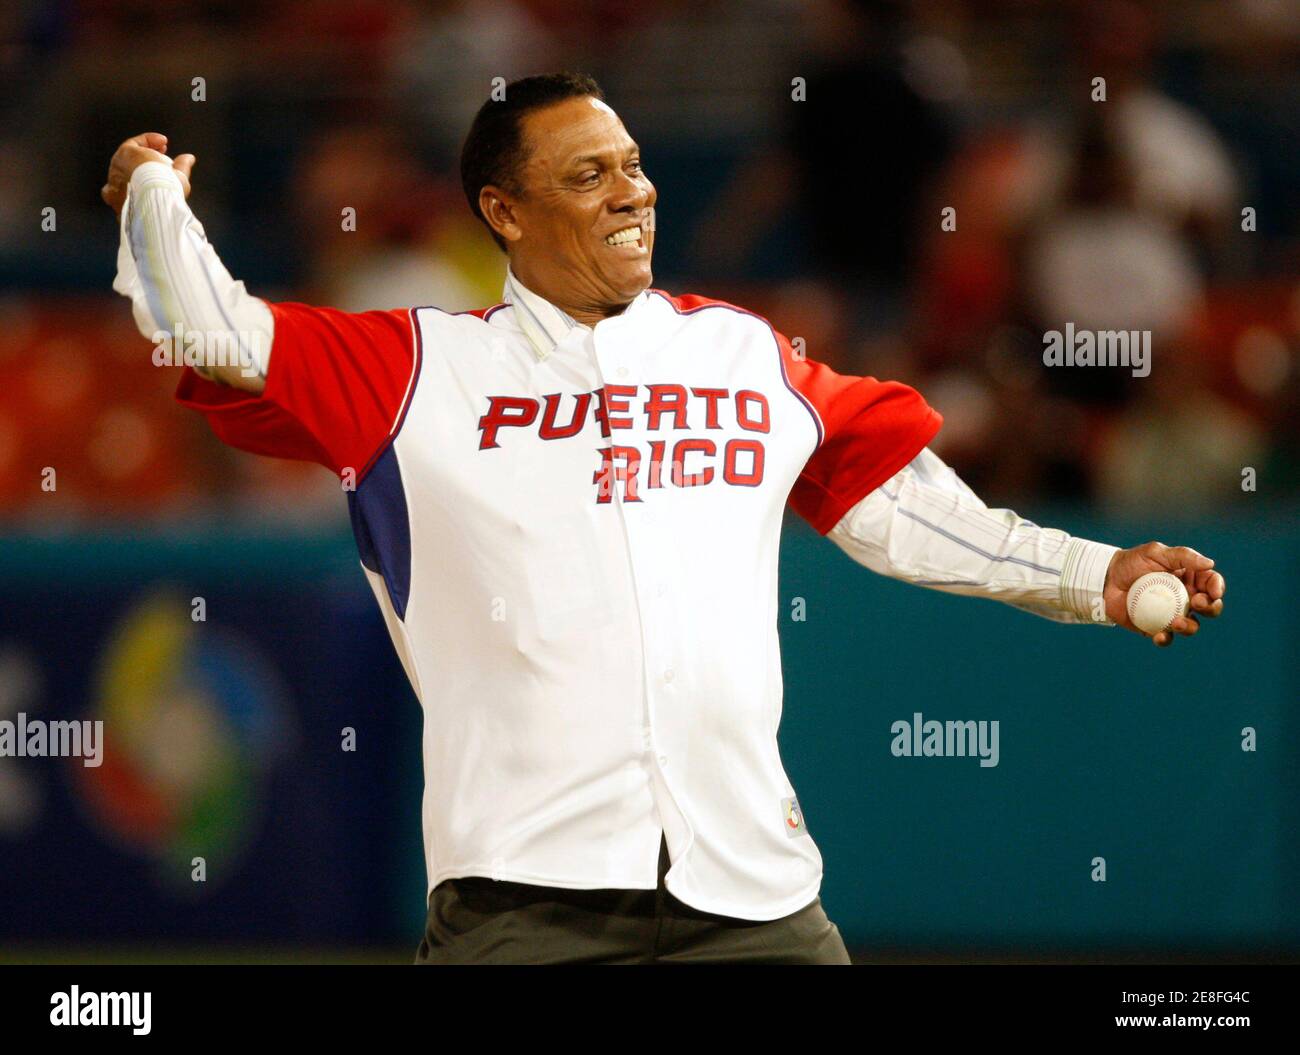 Former MLB player Tony Perez throws out the ceremonial first pitch wearing  a Puerto Rico jersey before Team Puerto Rico met Team Venezuela in their  second round World Baseball Classic game in